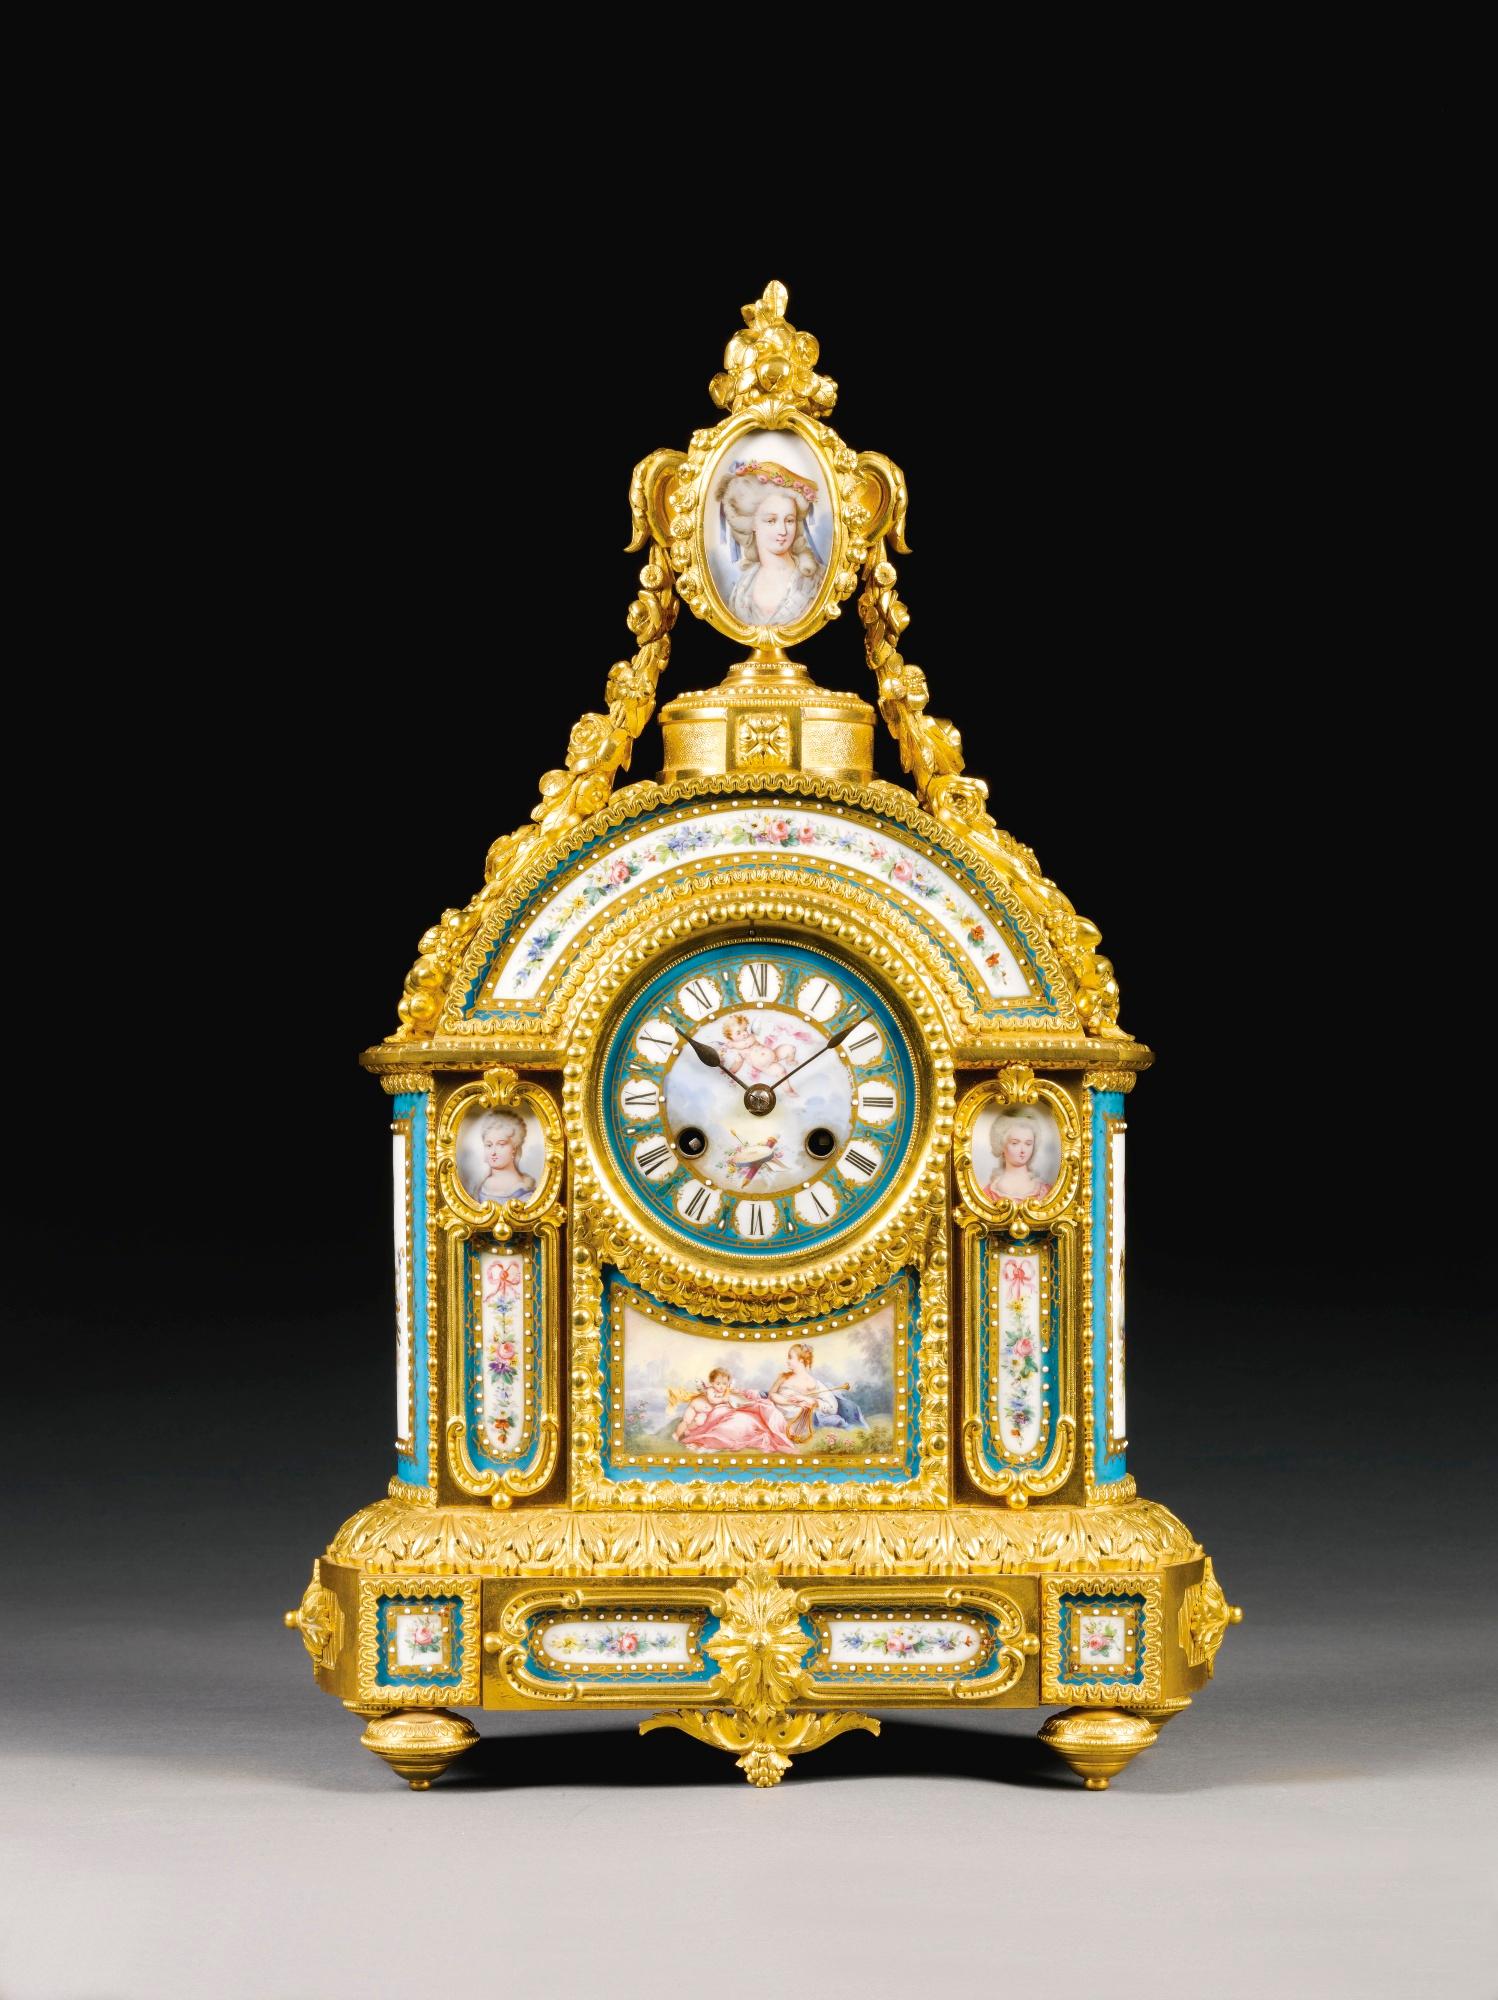 A fine and elaborate gilt bronze and Sèvres-style porcelain mantel clock.

French, circa 1870.

A fine and elaborate gilt bronze and Sèvres-style porcelain mantel clock with a four inch porcelain dial painted at the centre with a putto, and